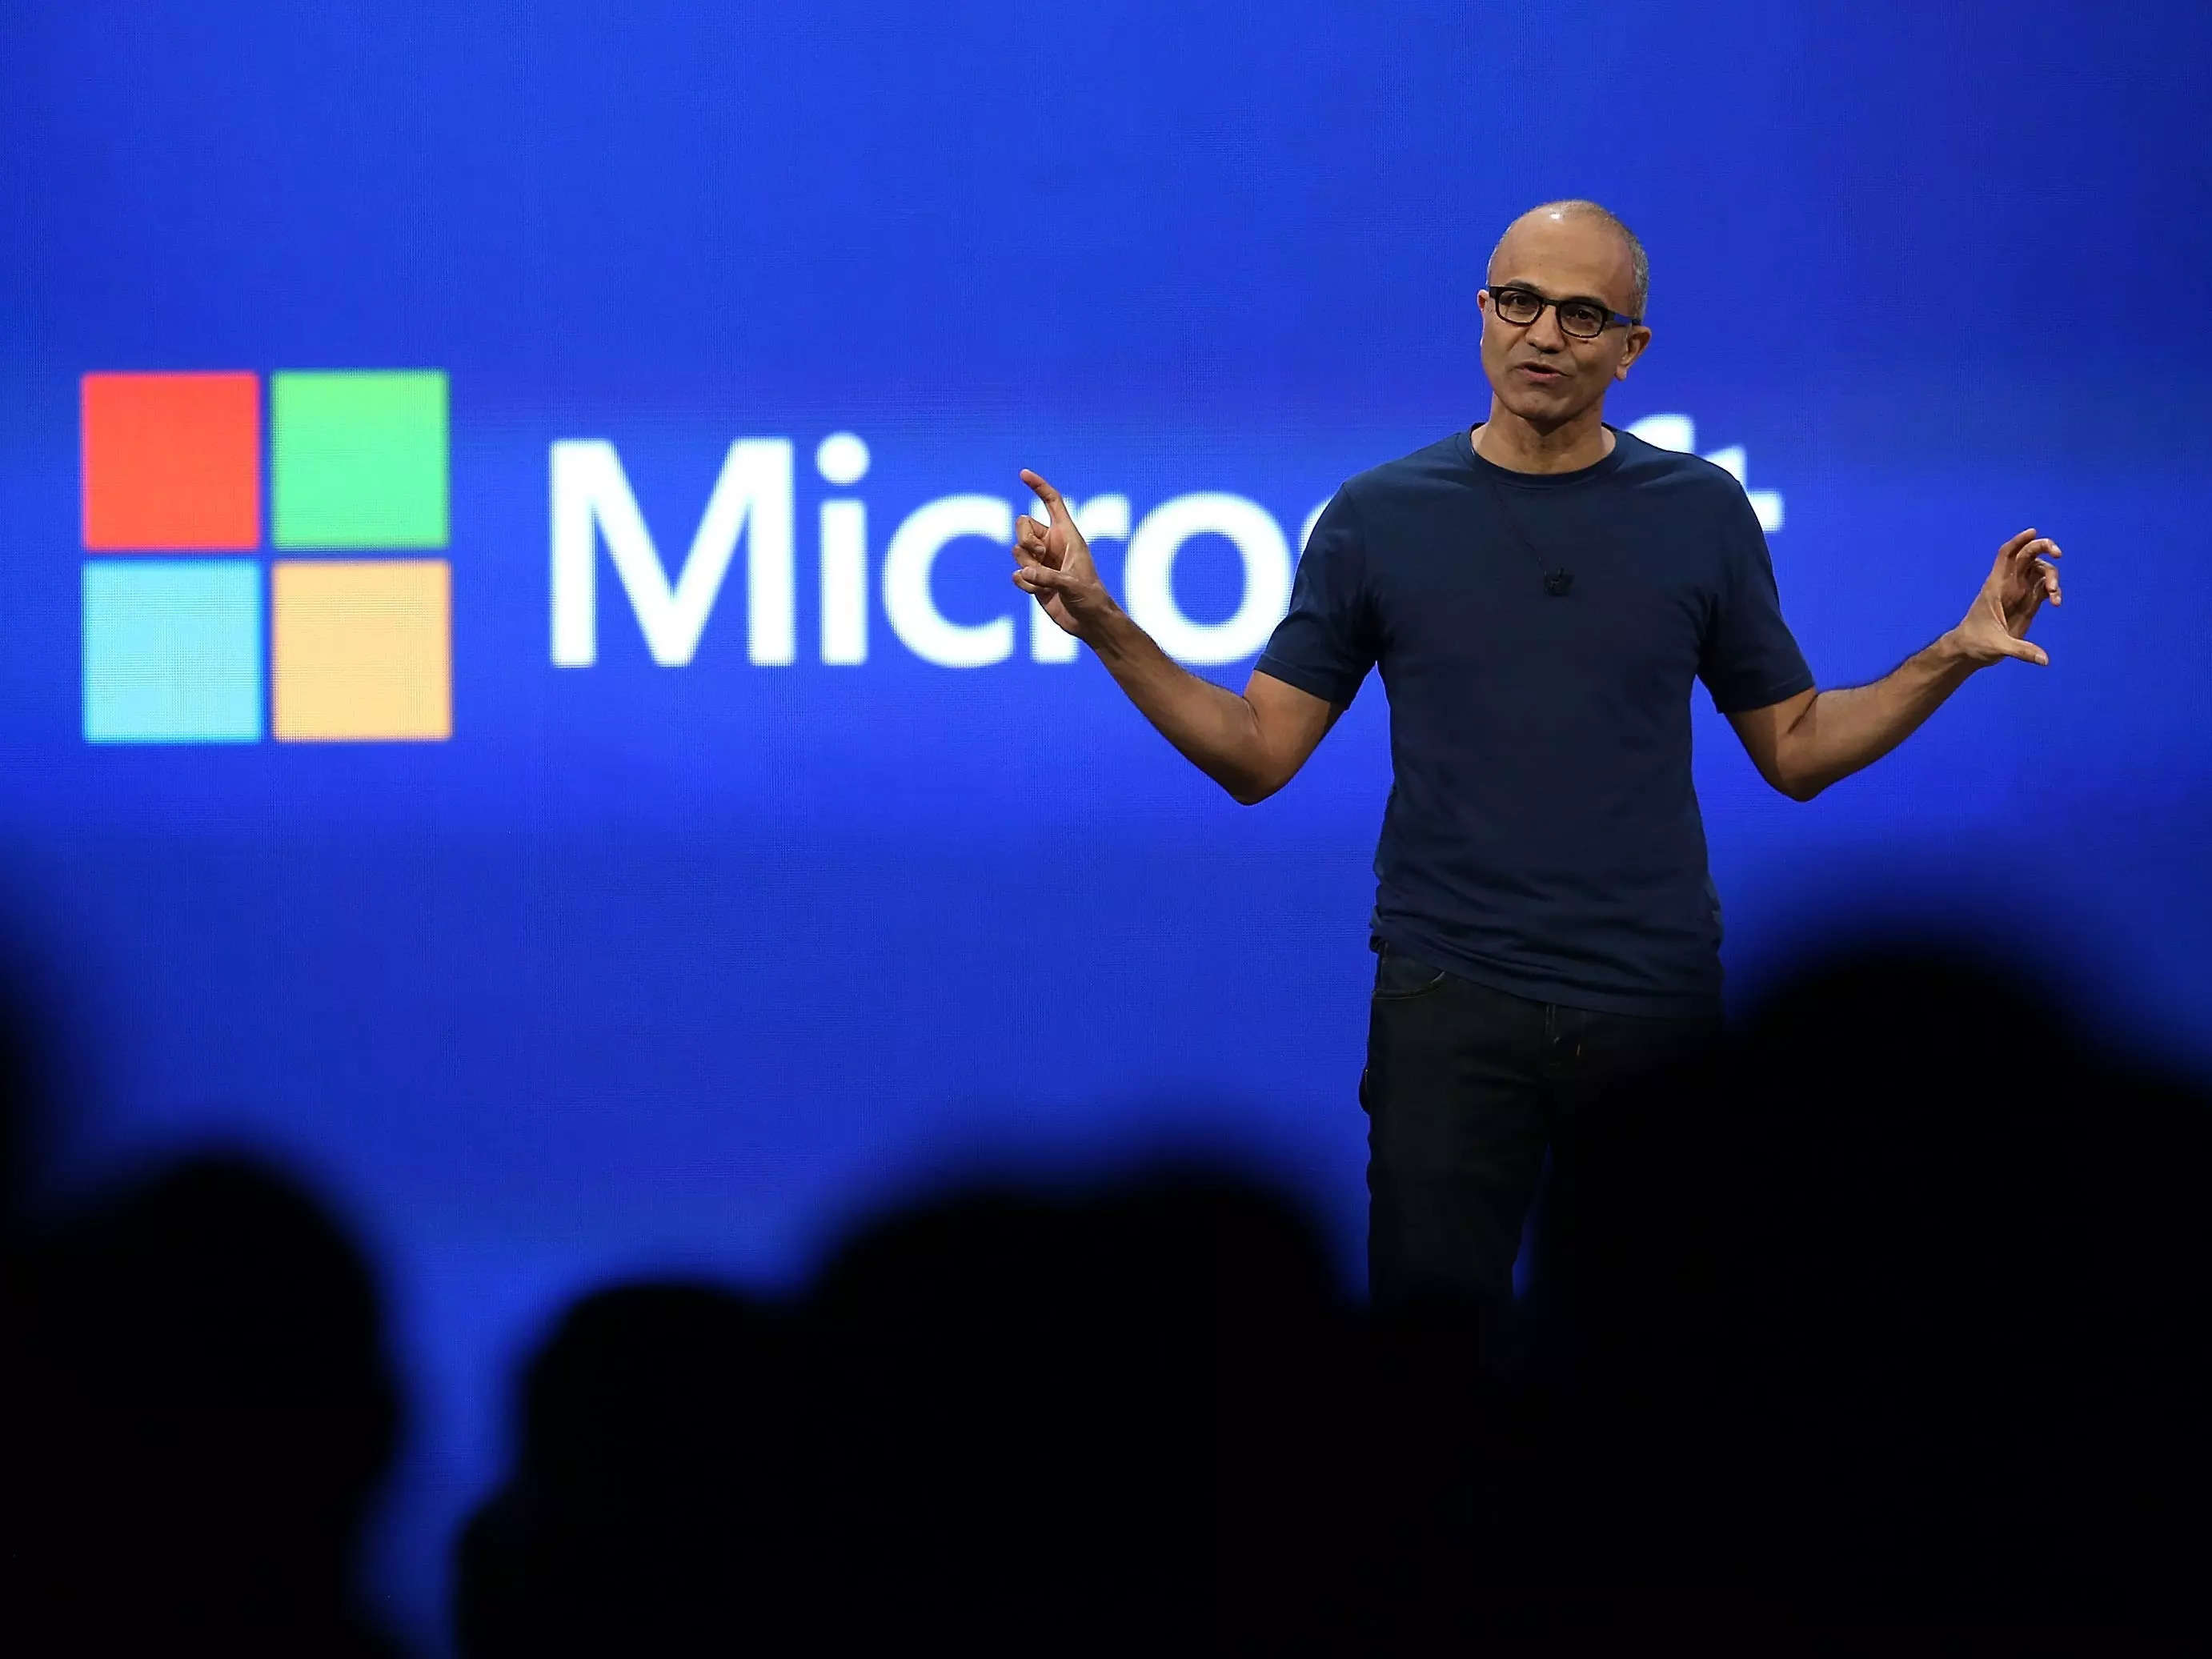 Microsoft joins Google, GM, in not personally attending CES Technology Conference due to Omicron increase